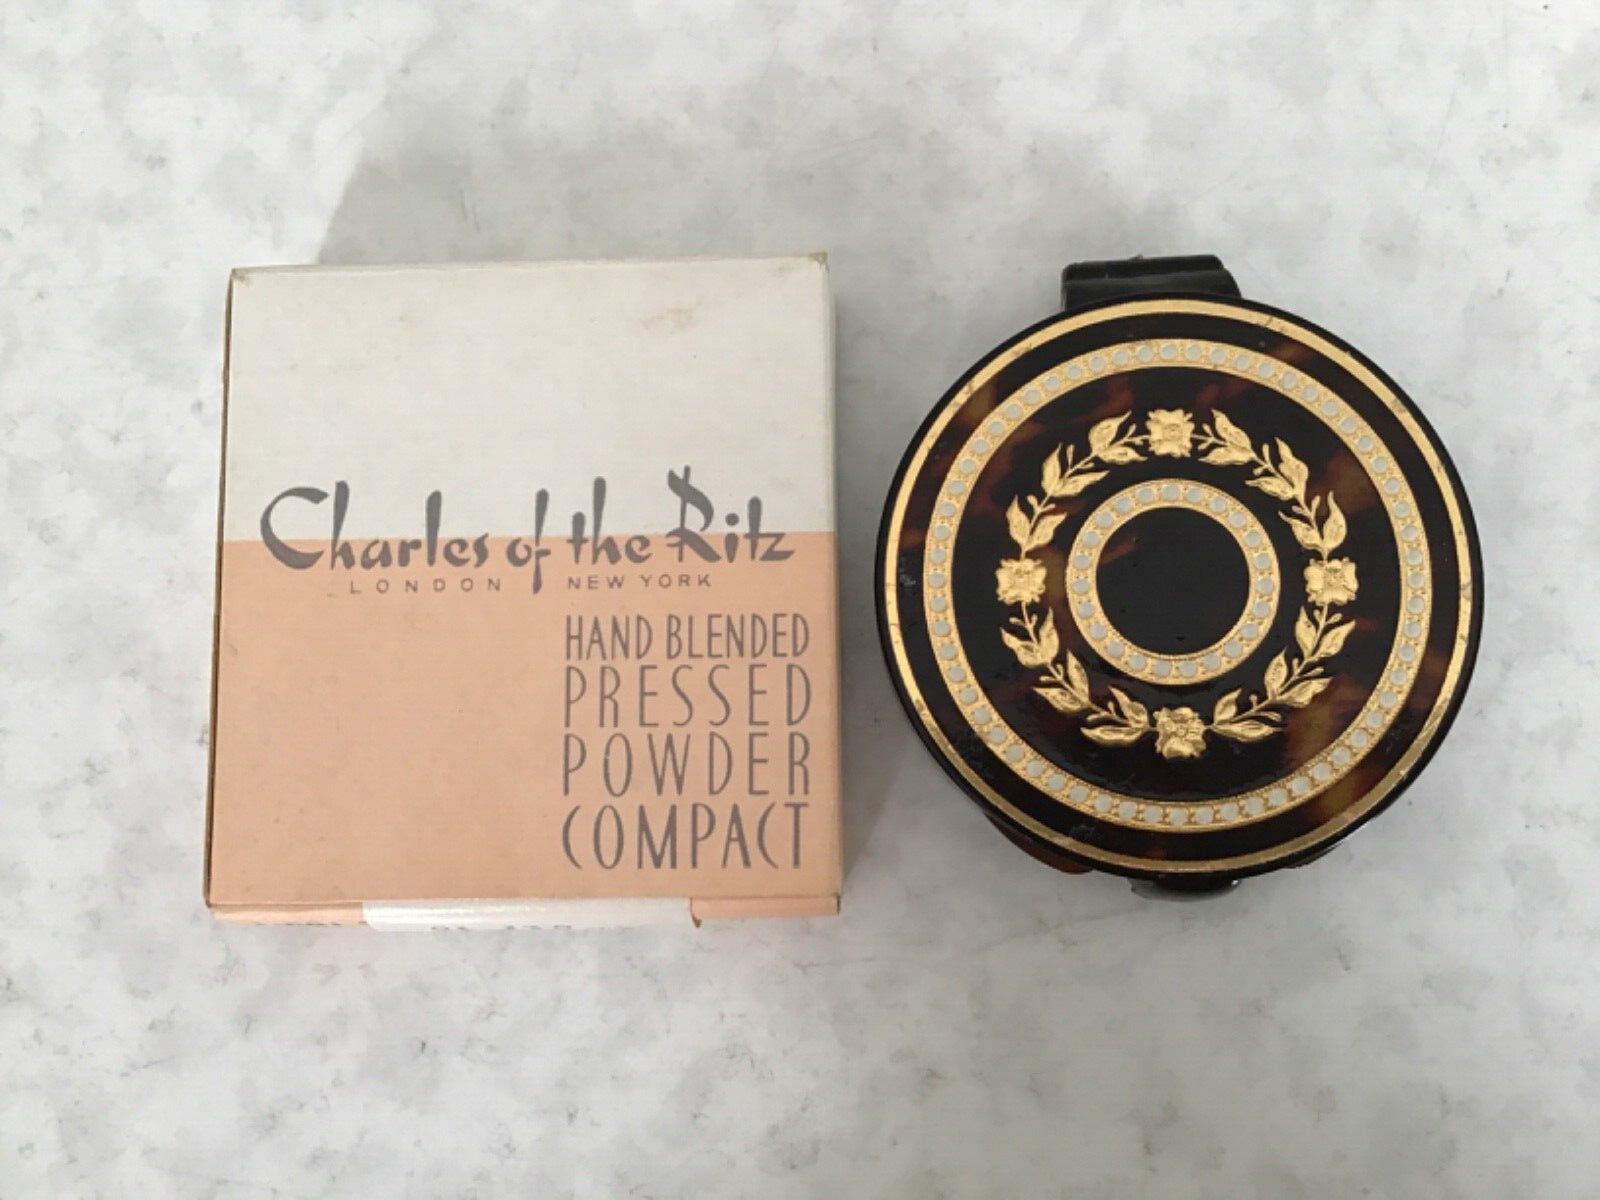 Vintage Charles of the Ritz powder compact new in original box